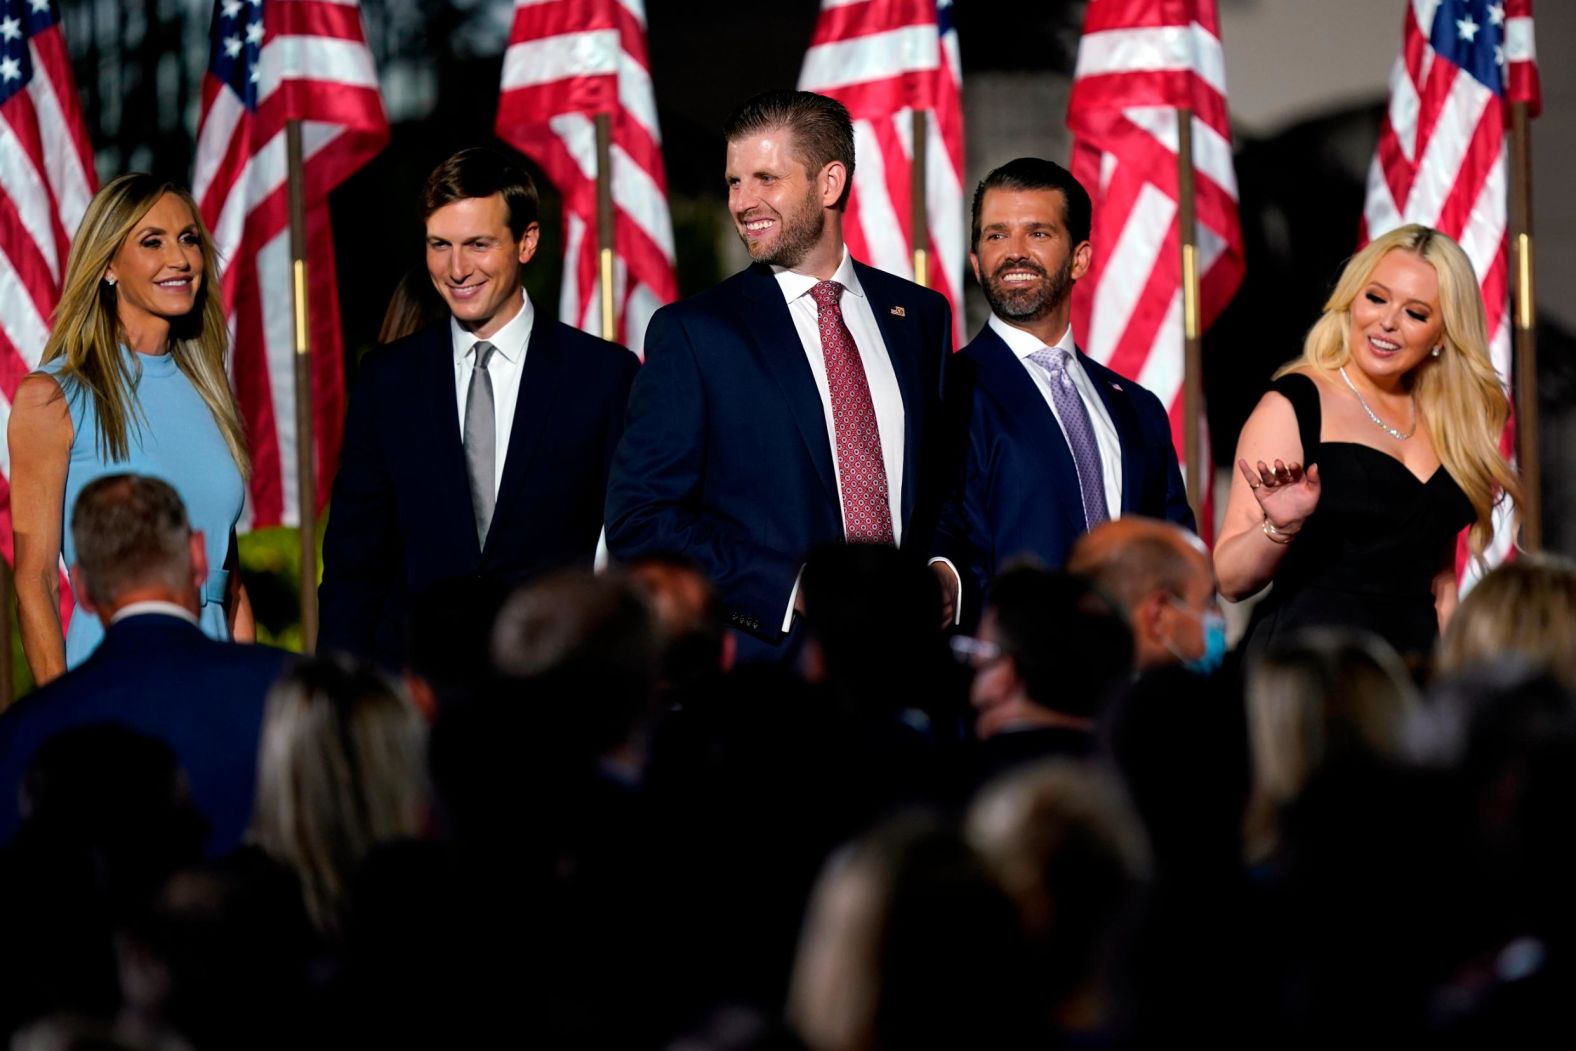 A few of Trump's children arrive at the White House before their father's speech. From right are Tiffany Trump, Donald Trump Jr. and Eric Trump. At far left is Eric's wife, Lara, next to Ivanka's husband, Jared Kushner.